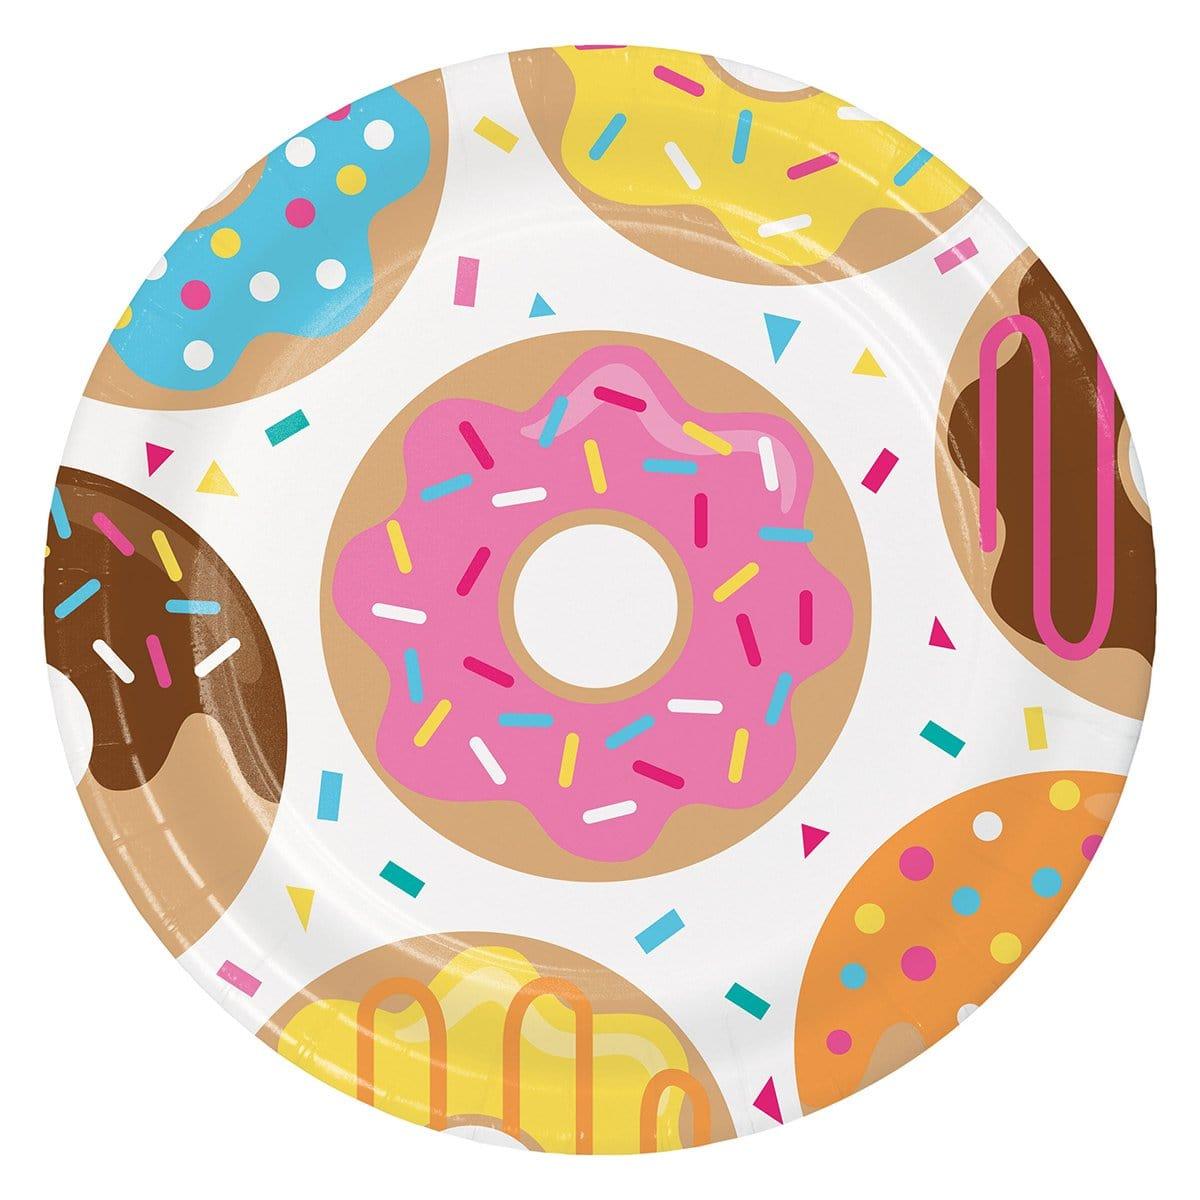 Buy Kids Birthday Donut Time Dinner Plates 9 inches, 8 per package sold at Party Expert